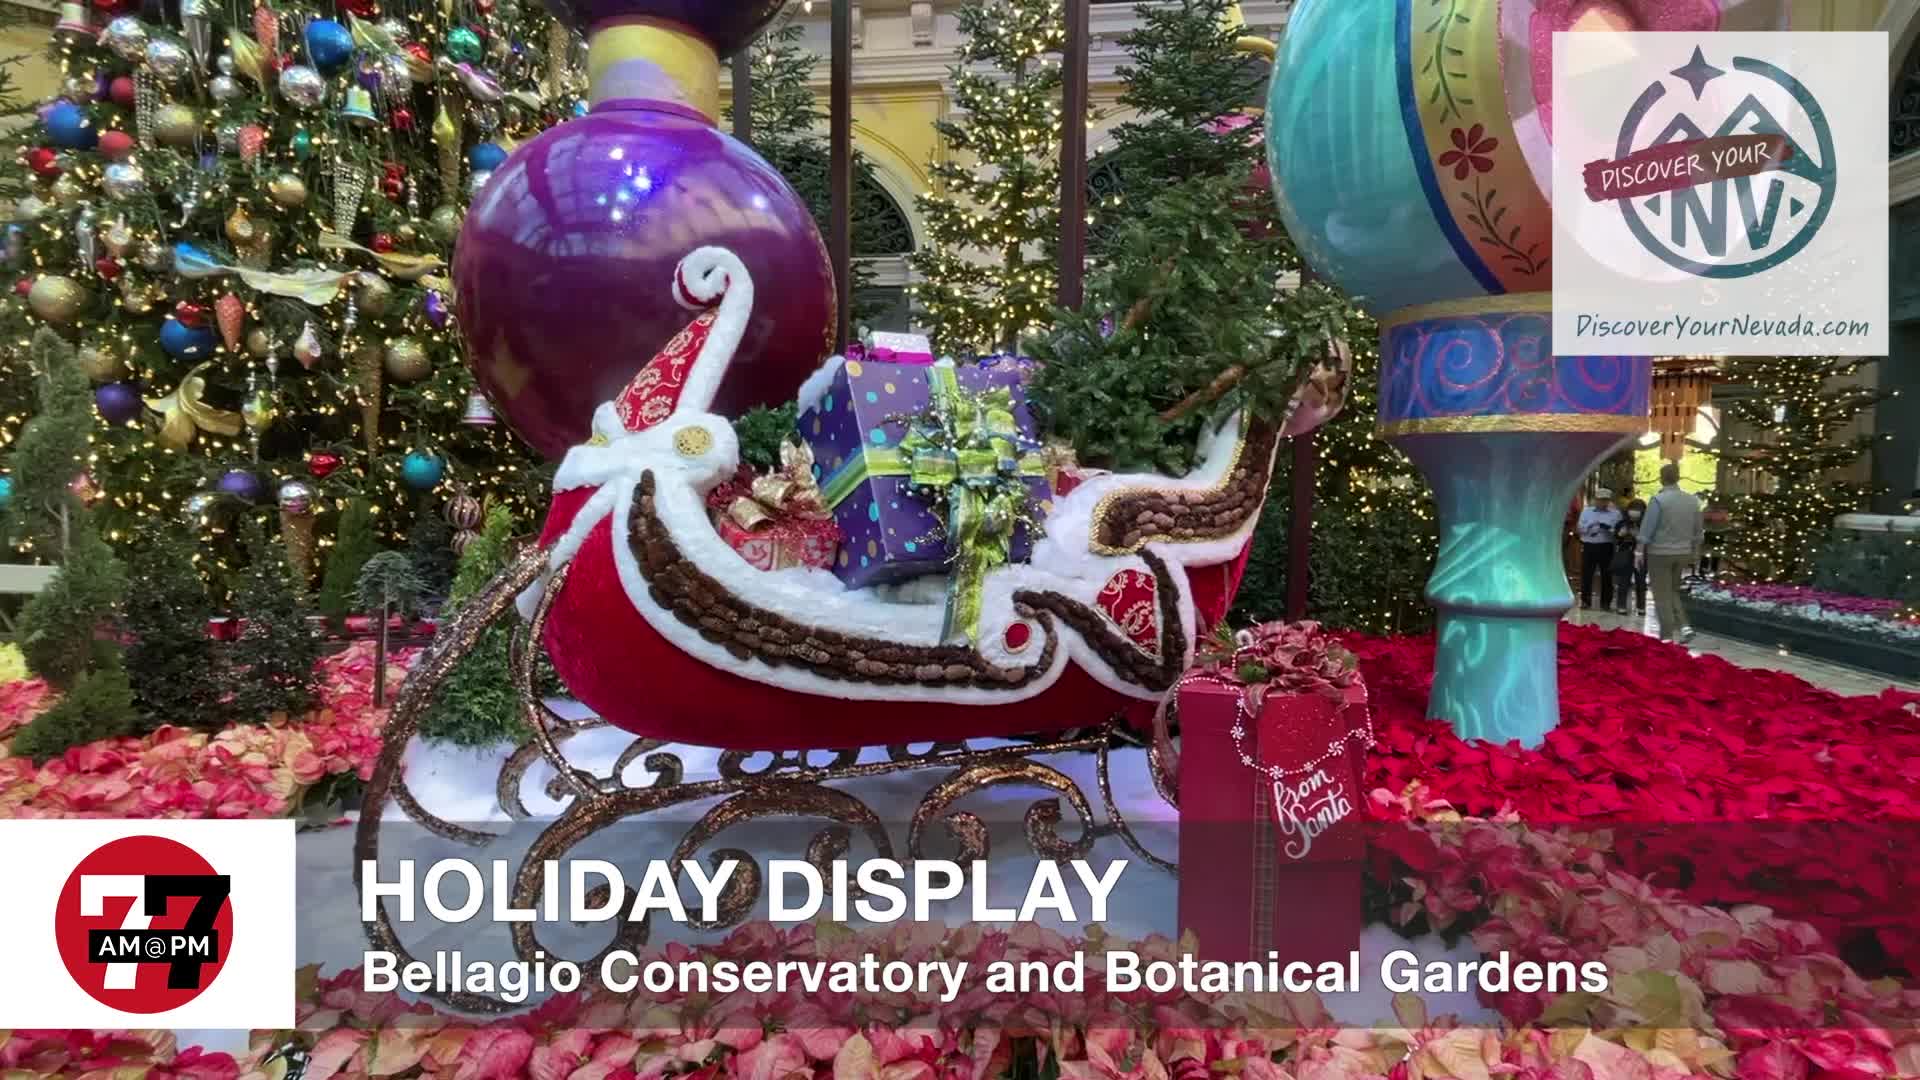 Holiday Display at Bellagio Conservatory